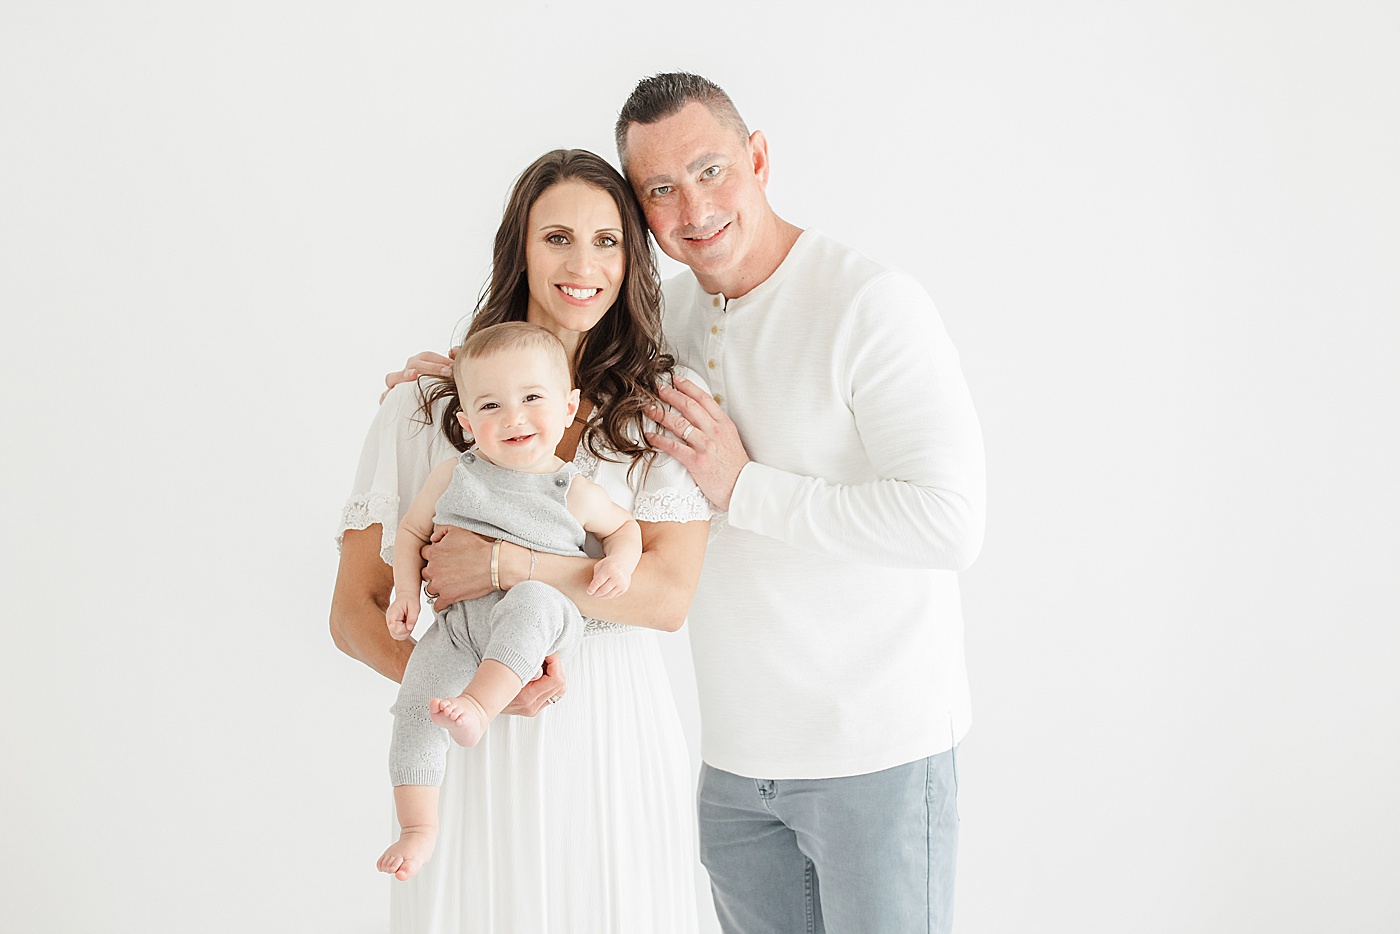 Family photos during sons first birthday session in studio with Kristin Wood Photography.